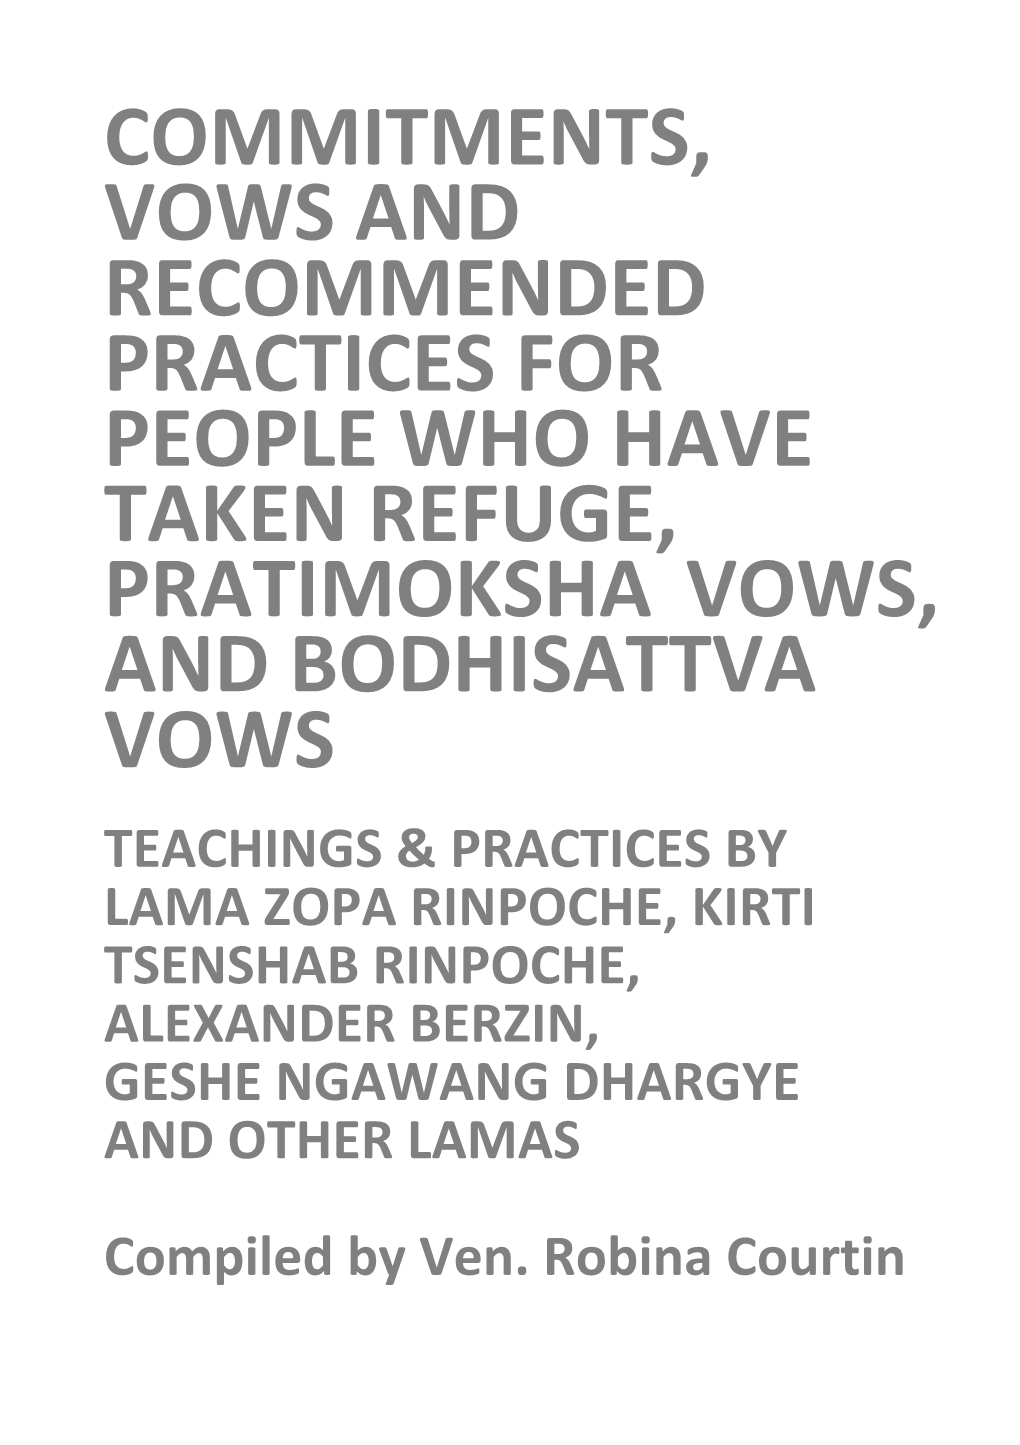 Commitments, Vows and Recommended Practices for People Who Have Taken Refuge, Pratimoksha Vows, and Bodhisattva Vows